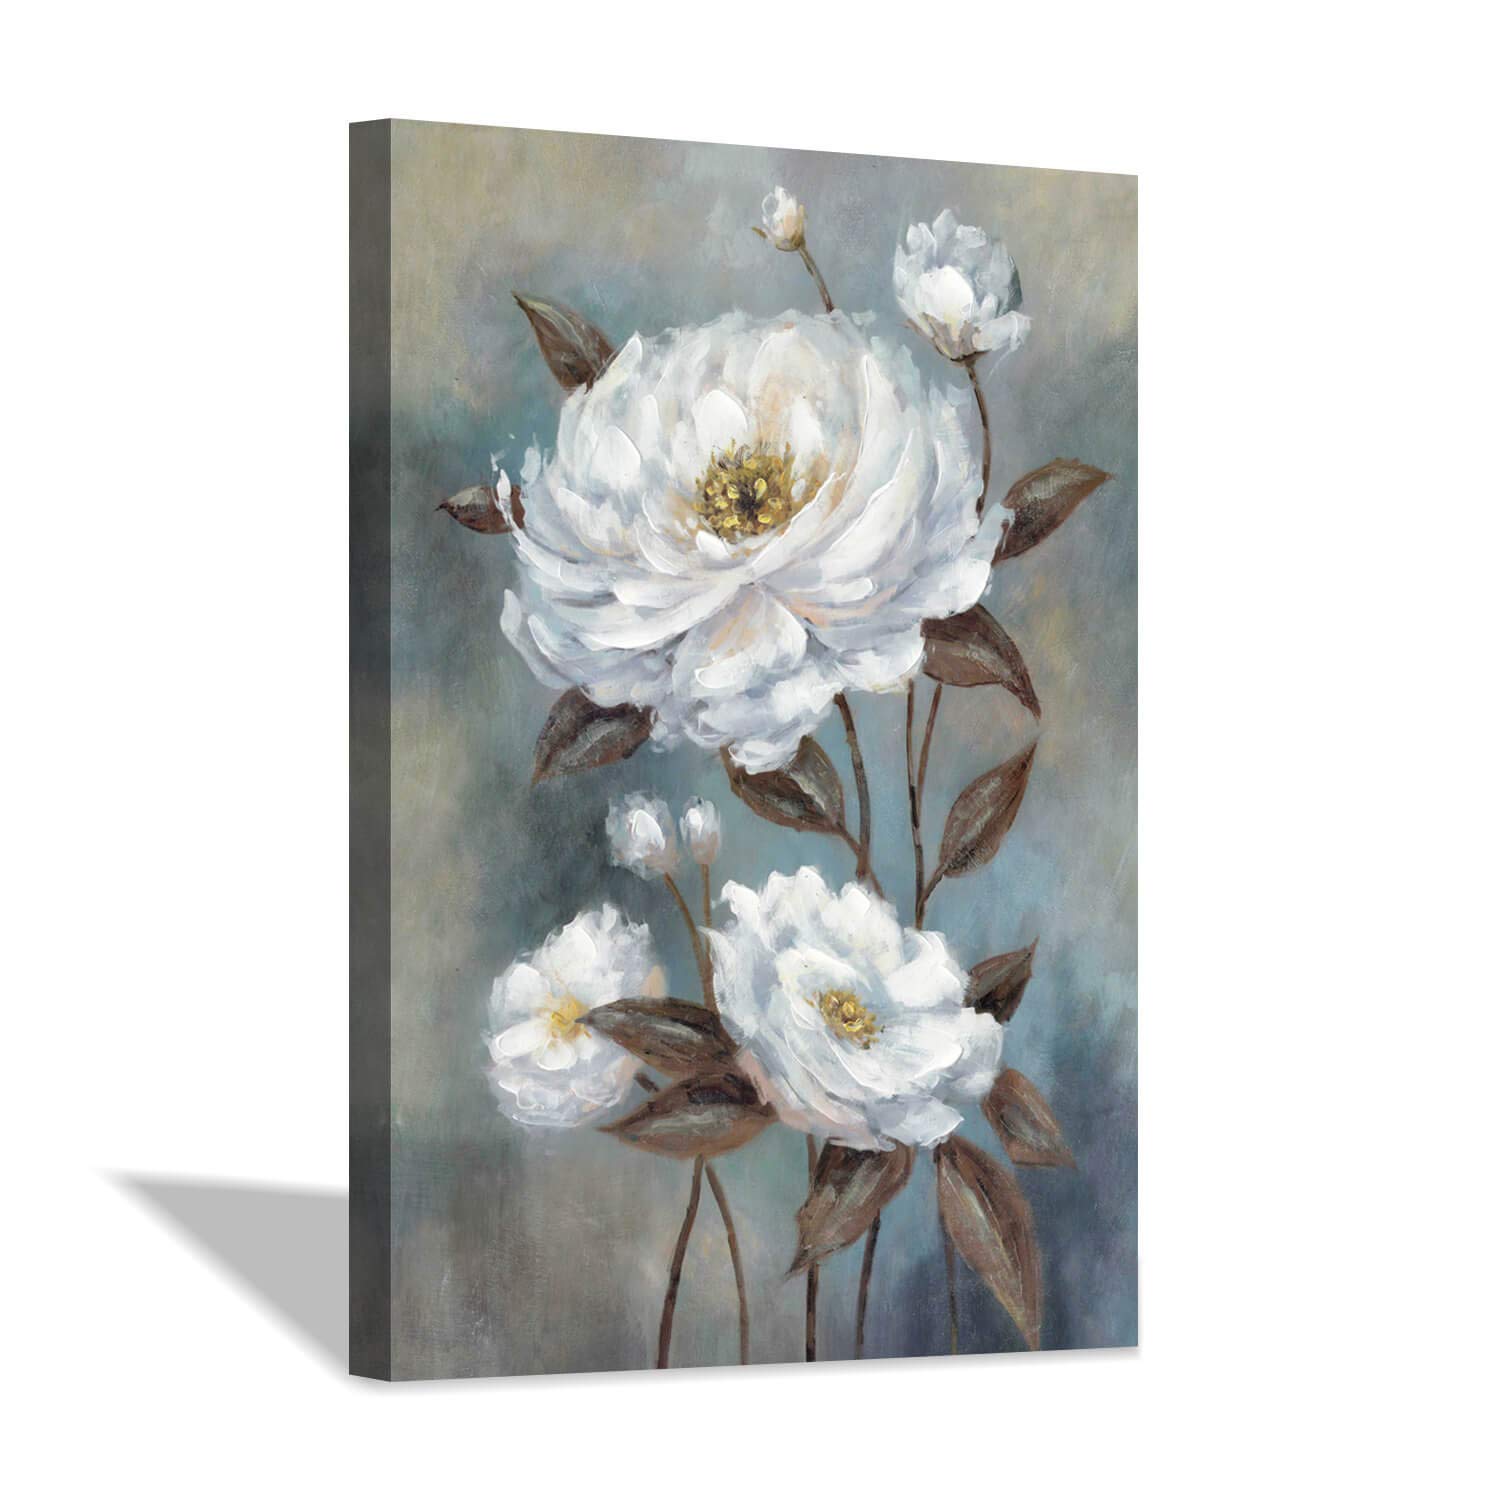 36 x 36 x 1 Panel Flower Picture Abstract Wall Art Floral Painting Hand Painted Artwork on Canvas for Office